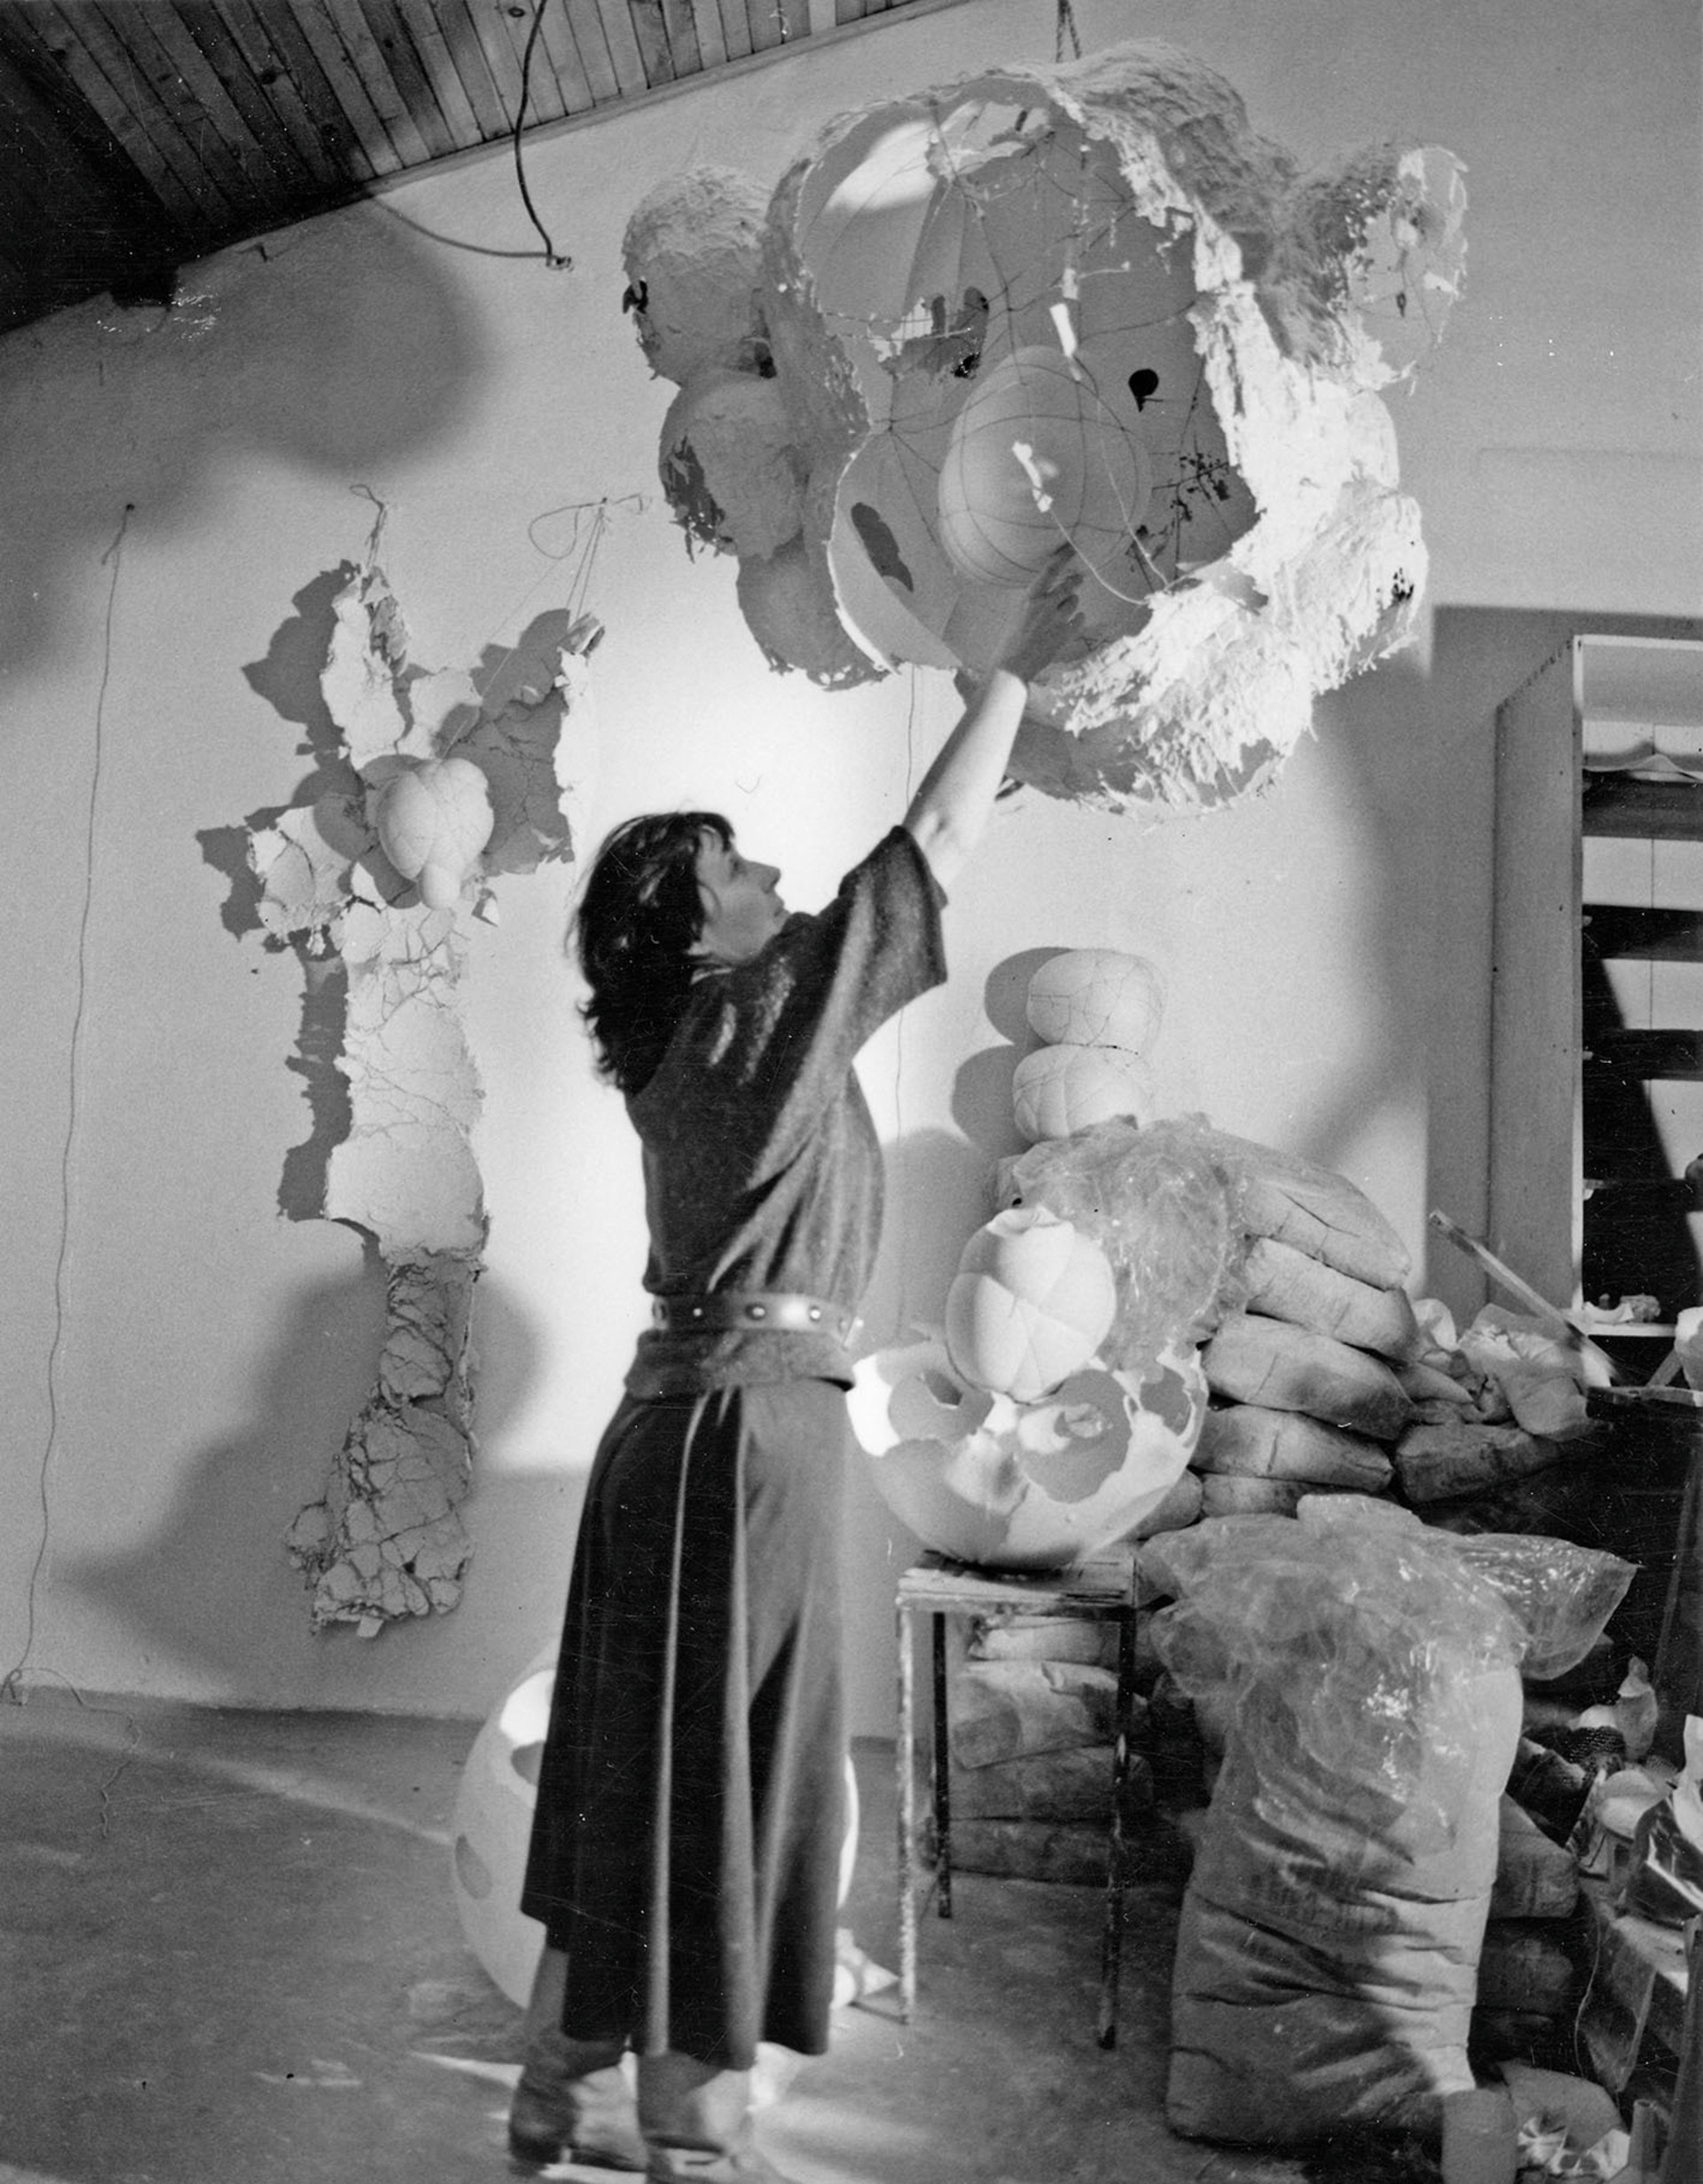 Maria Bartuszová in her studio with sculptures, Košice, Slovakia 1987, printed 2022. Reproduced from the Archive of Maria Bartuszová, Košice(1).jpg